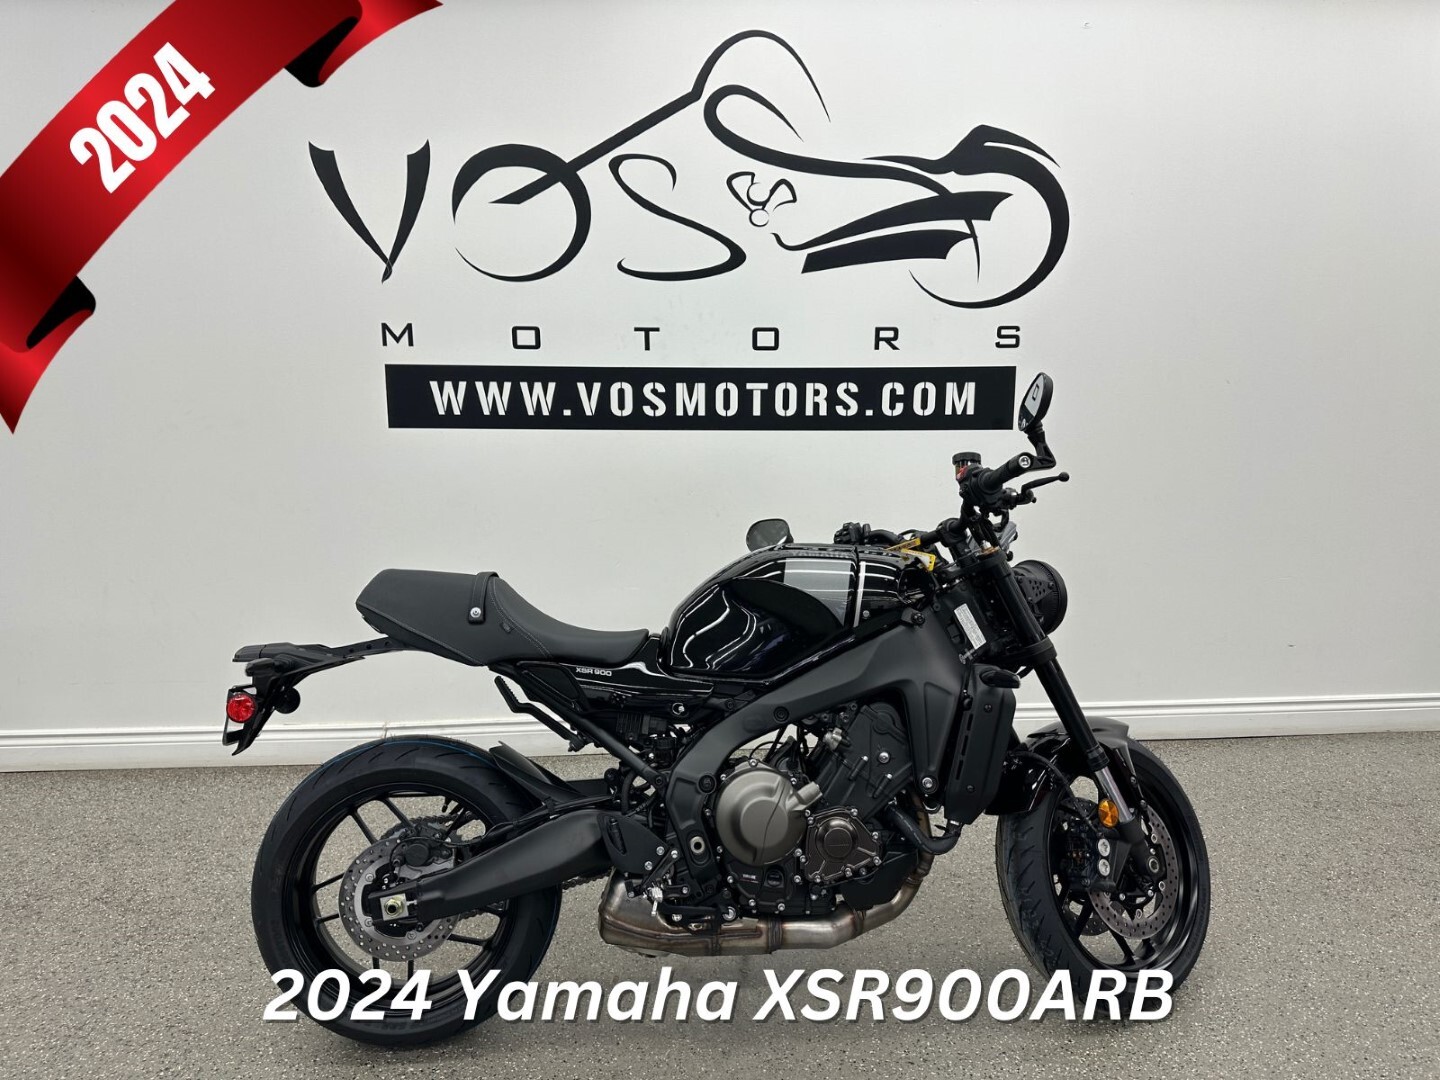 2024 Yamaha XSR900ARB XSR900ARB - V5444NP - -No Payments for 1 Year**